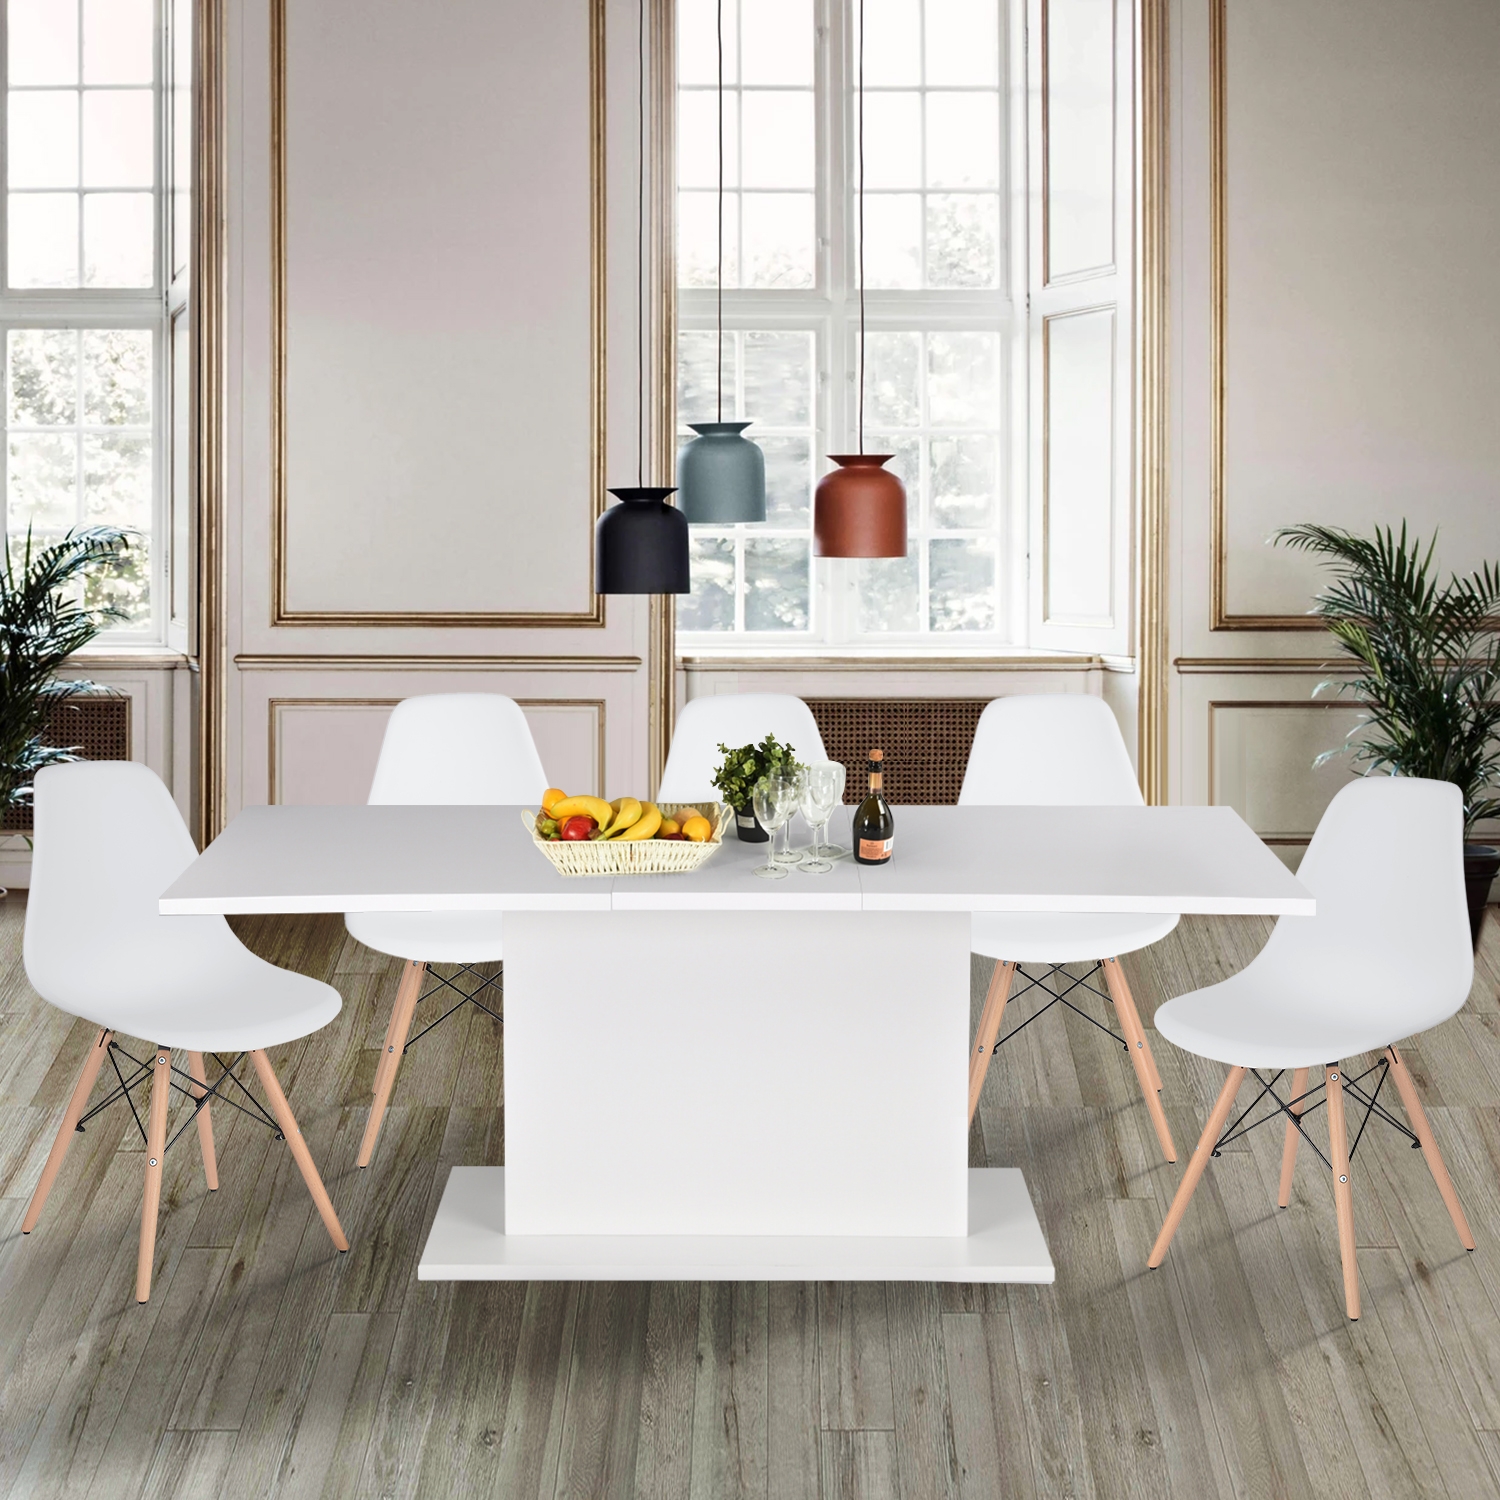 Butterfly Extension Pedestal Dining Table - HIGH GLOSSY WHITE